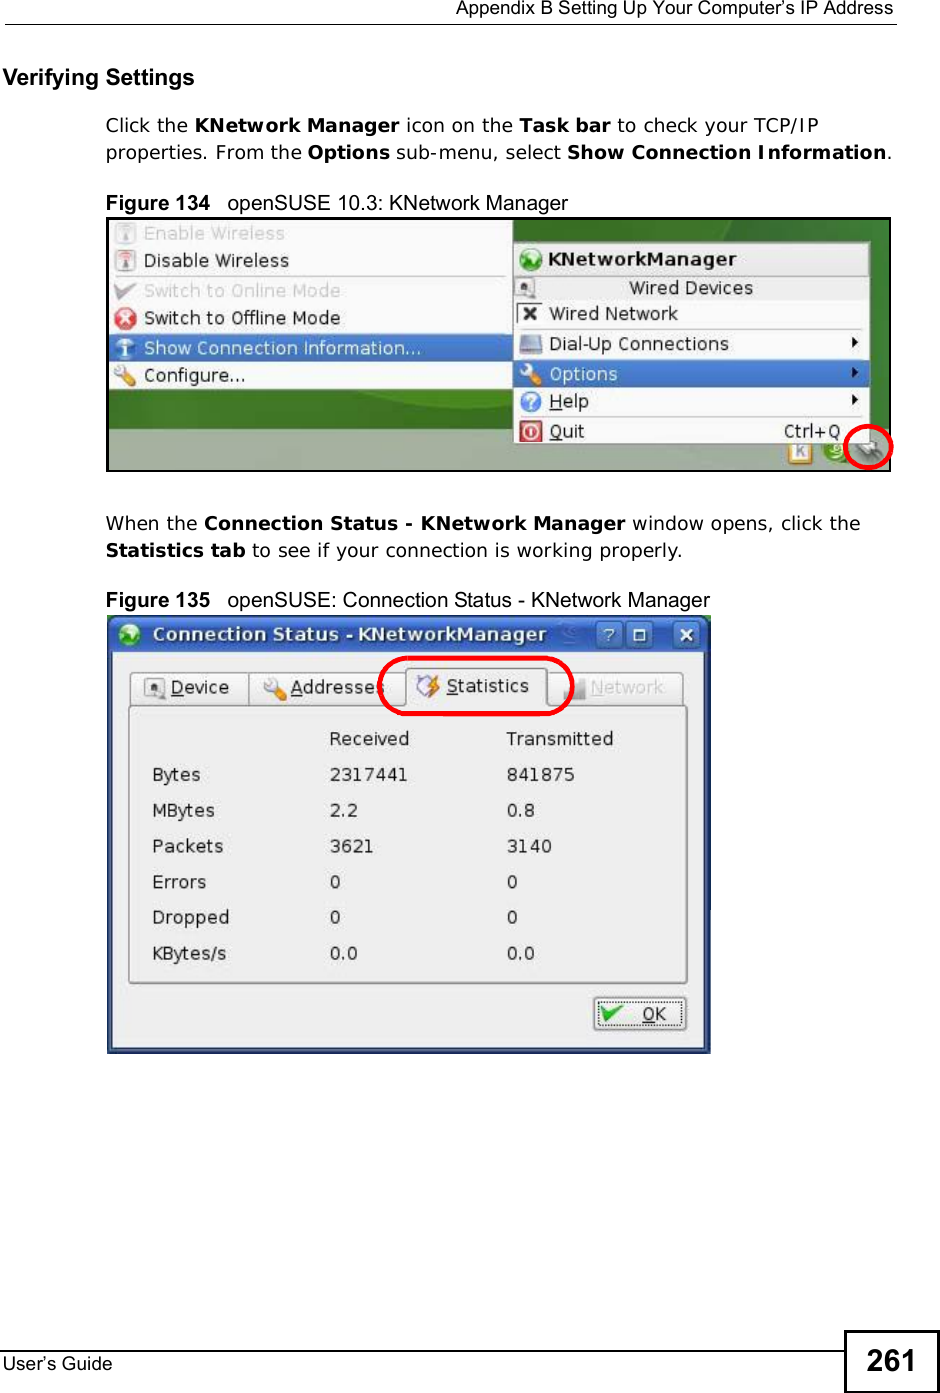  Appendix BSetting Up Your Computer s IP AddressUser s Guide 261Verifying SettingsClick the KNetwork Manager icon on the Task bar to check your TCP/IP properties. From the Options sub-menu, select Show Connection Information.Figure 134   openSUSE 10.3: KNetwork ManagerWhen the Connection Status - KNetwork Manager window opens, click the Statistics tab to see if your connection is working properly.Figure 135   openSUSE: Connection Status - KNetwork Manager